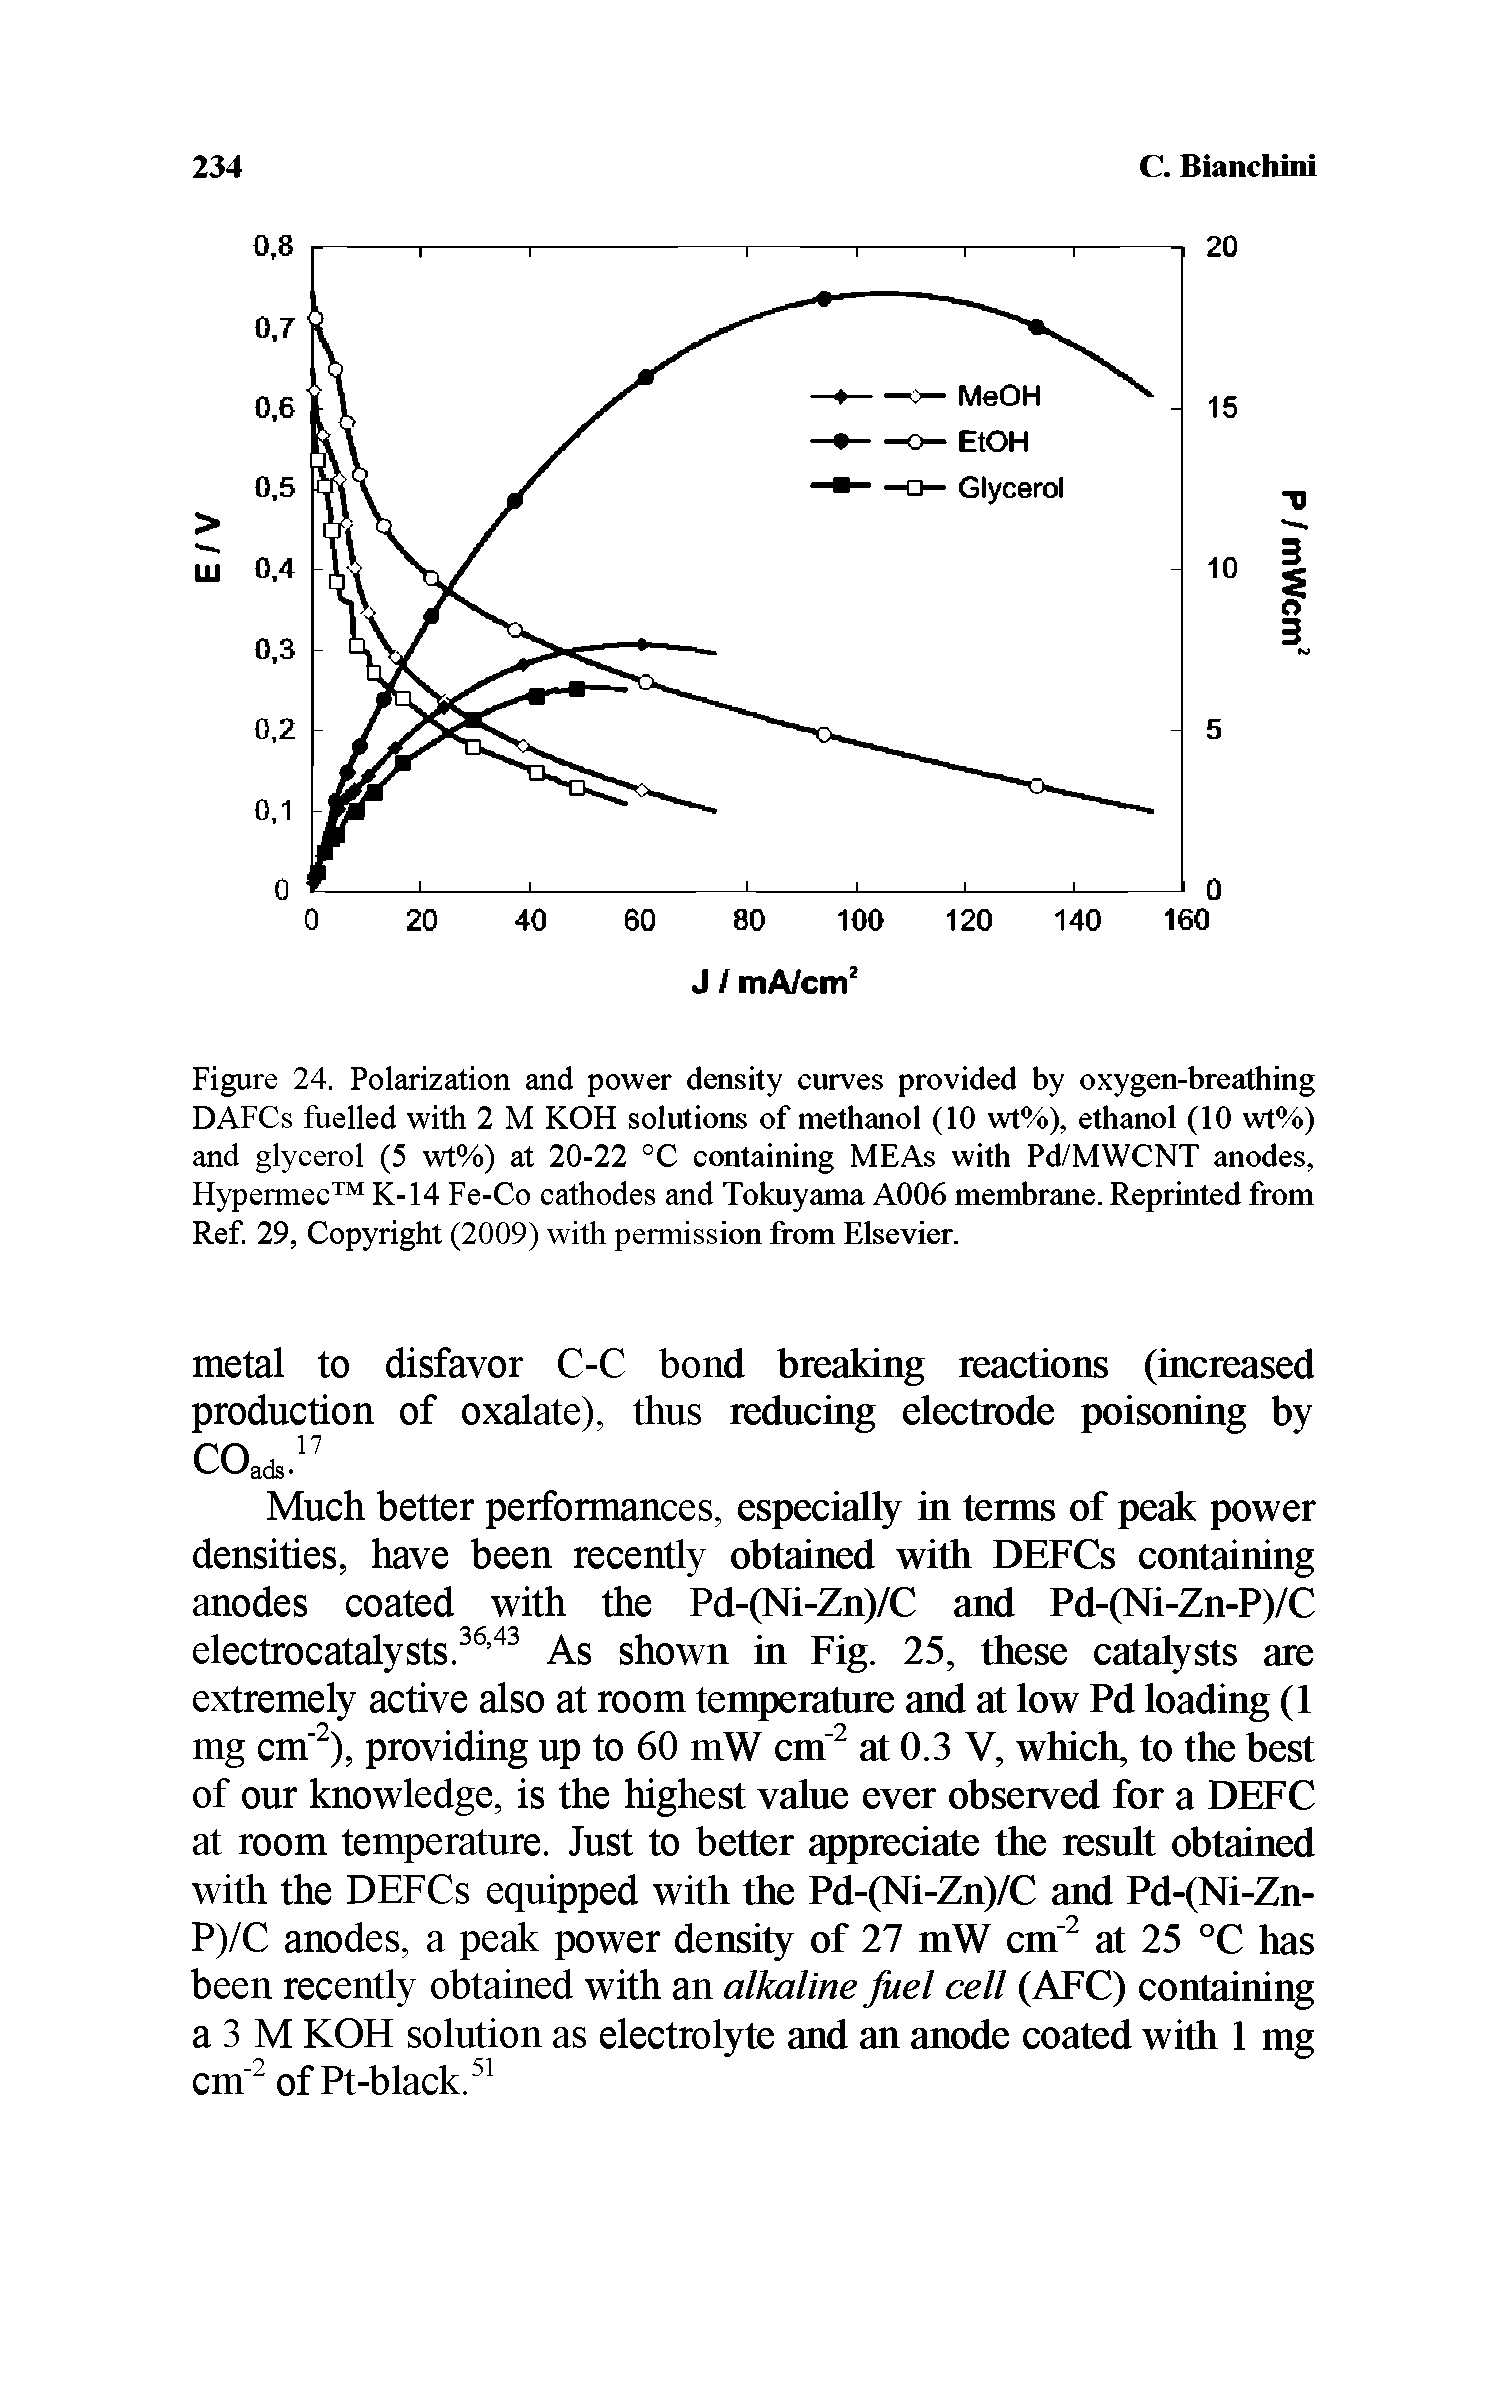 Figure 24. Polarization and power density curves provided by oxygen-breathing DAFCs fuelled with 2 M KOH solutions of methanol (10 wt%), ethanol (10 wt%) and glycerol (5 wt%) at 20-22 °C containing MEAs with P MWCNT anodes, Hypermec K-14 Fe-Co cathodes and Tokuyama A006 membrane. Reprinted from Ref. 29, Copyright (2009) with permission from Elsevier.